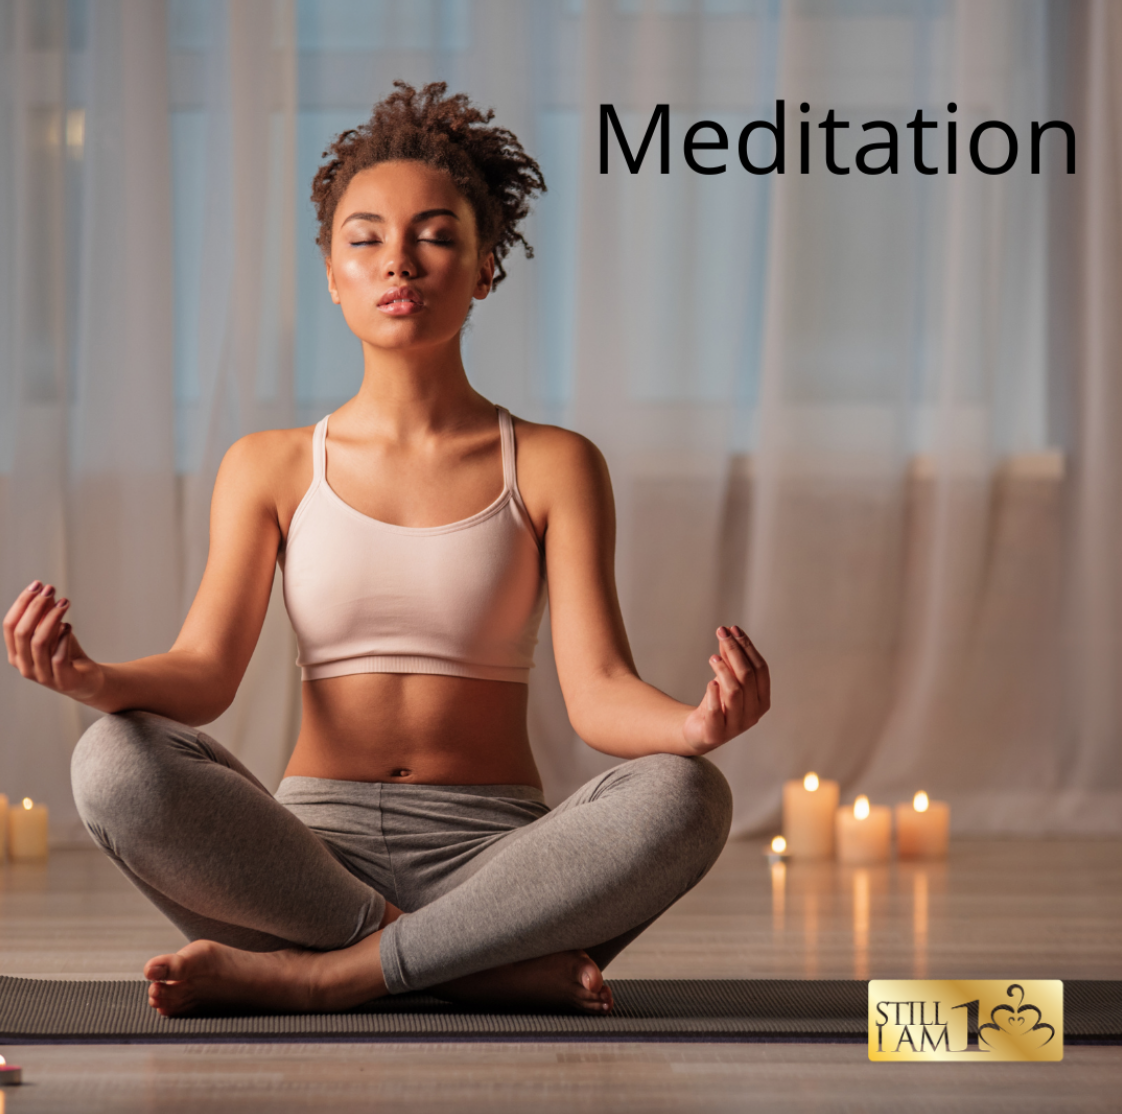 Woman sitting in lotus position meditating with 3 candles in the background.